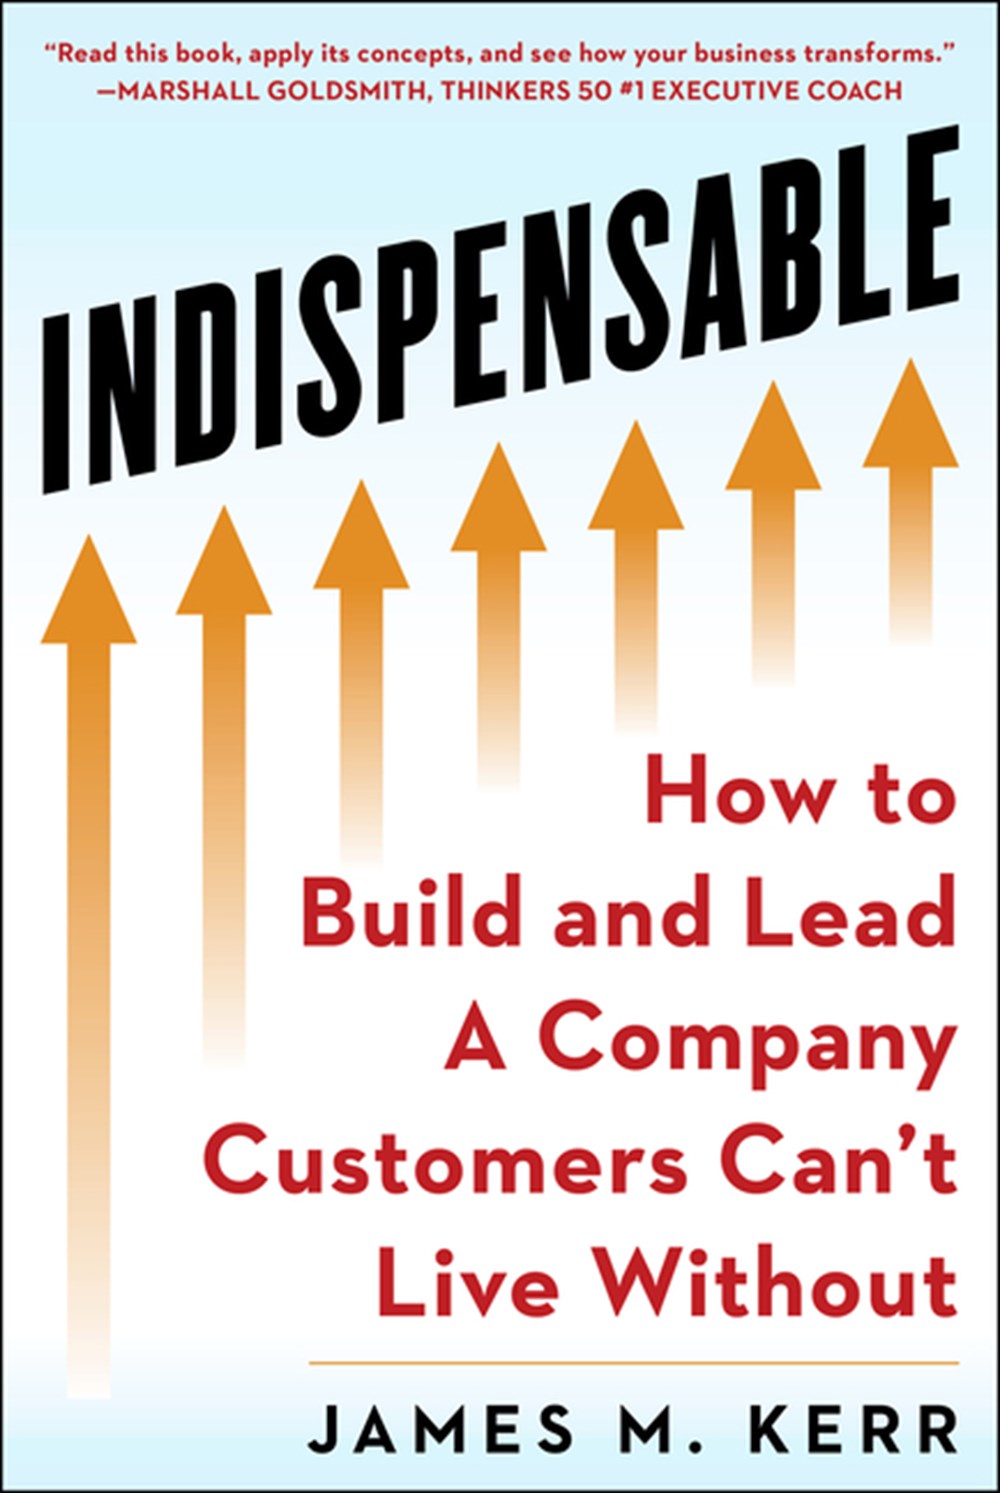 Indispensable Build and Lead a Company Customers Can't Live Without